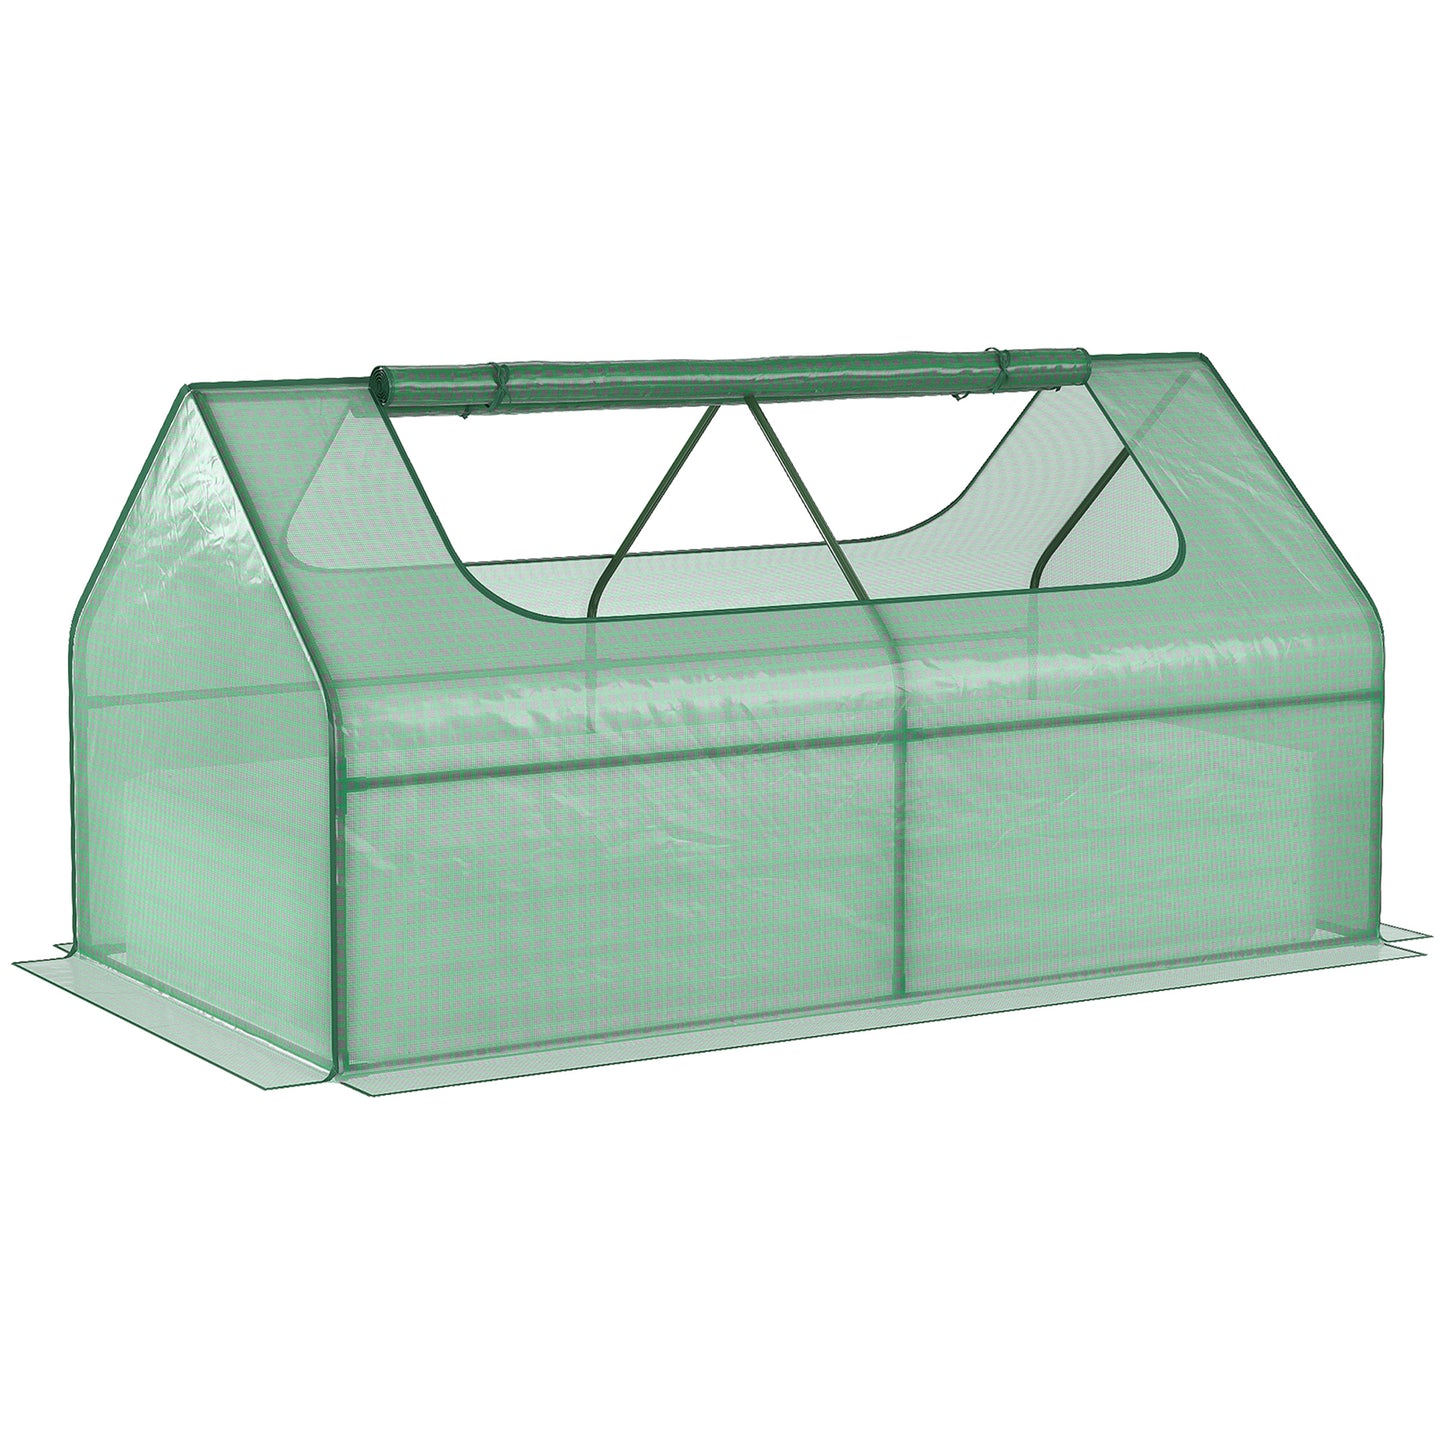 Outsunny Raised Garden Bed with Greenhouse, Steel Planter Box with Plastic Cover, Roll Up Window, Dual Use for Flowers, Vegetables, Fruits and Herbs, 185L x 95W x 92H cm, Green